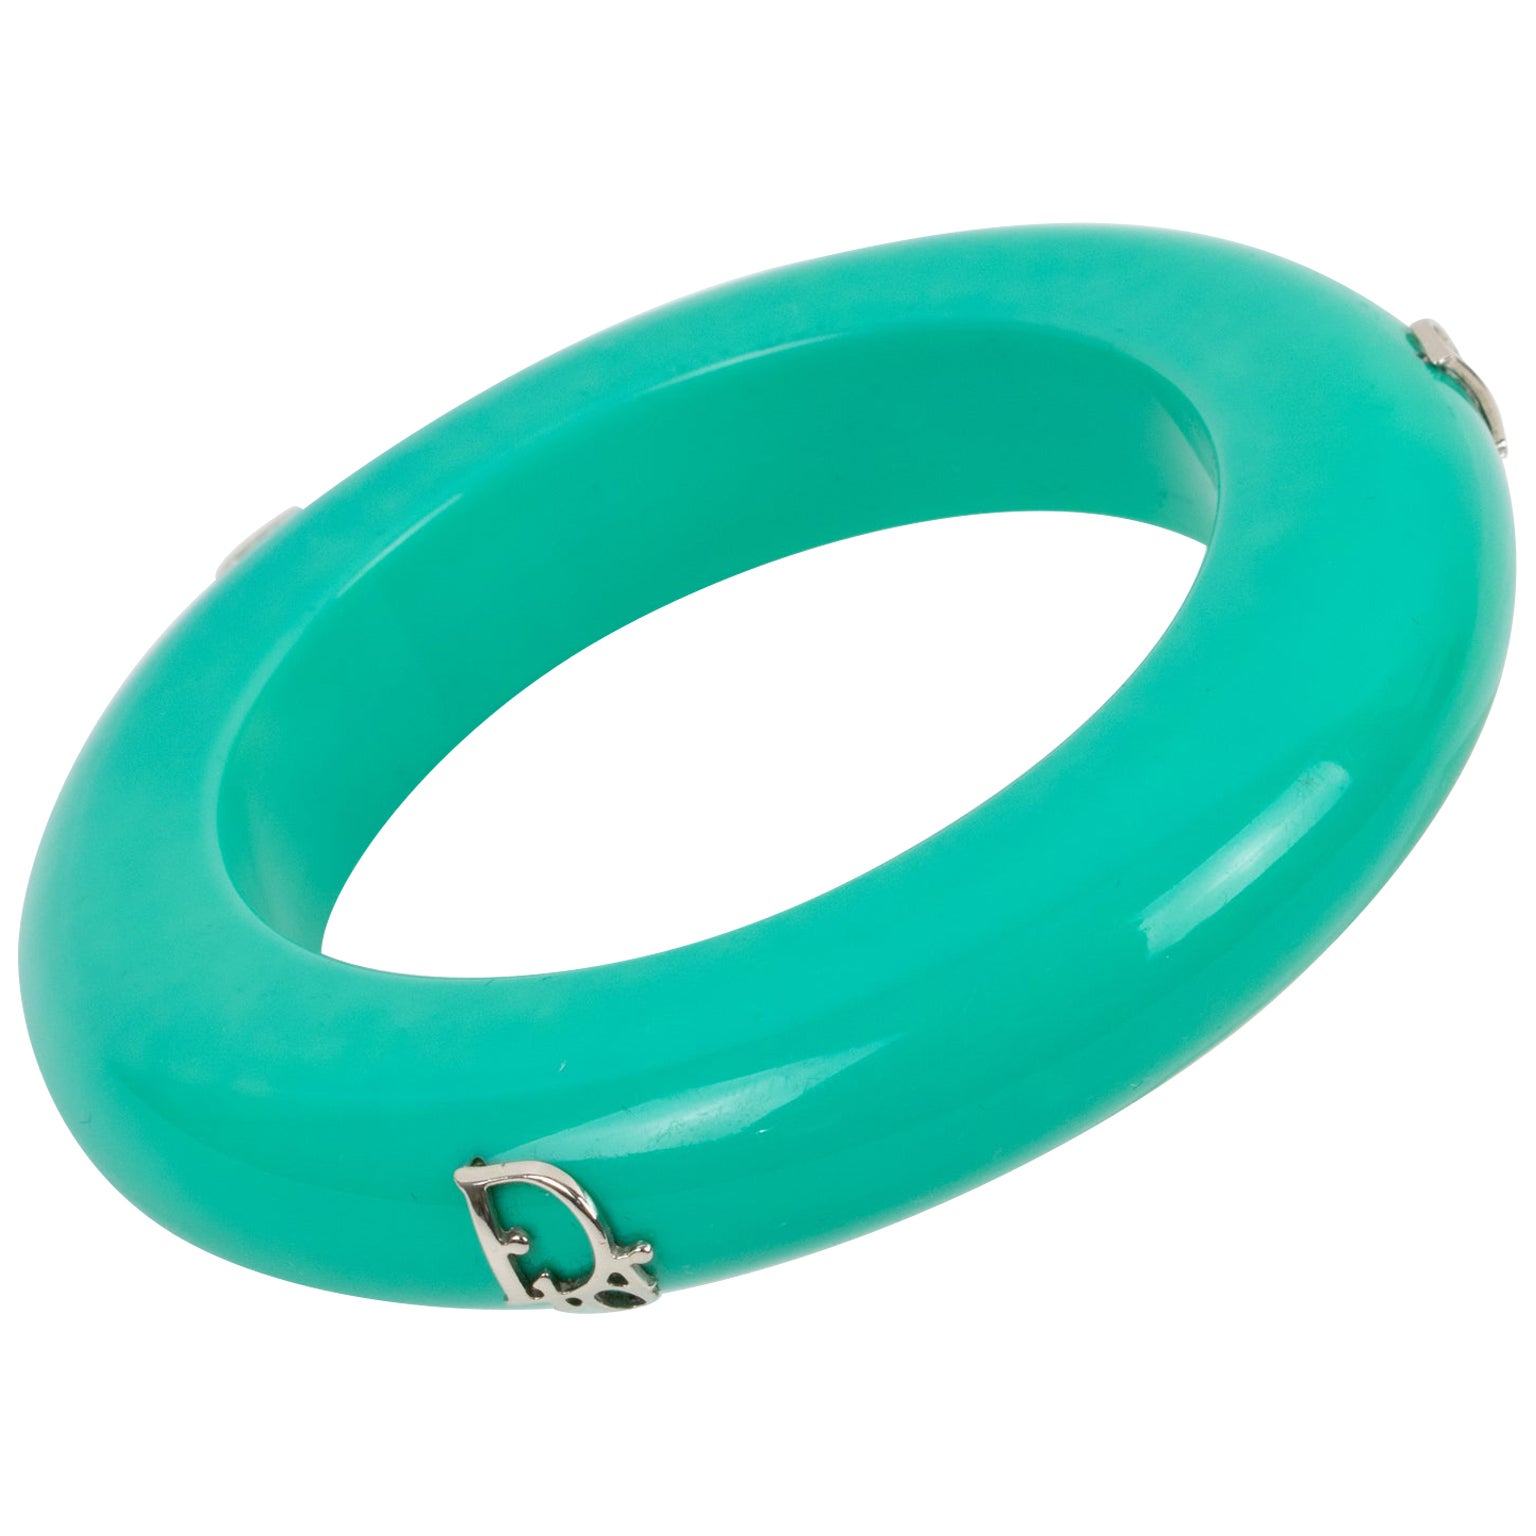 Christian Dior Turquoise Resin Acrylic Bracelet Bangle with Silvered Logo For Sale